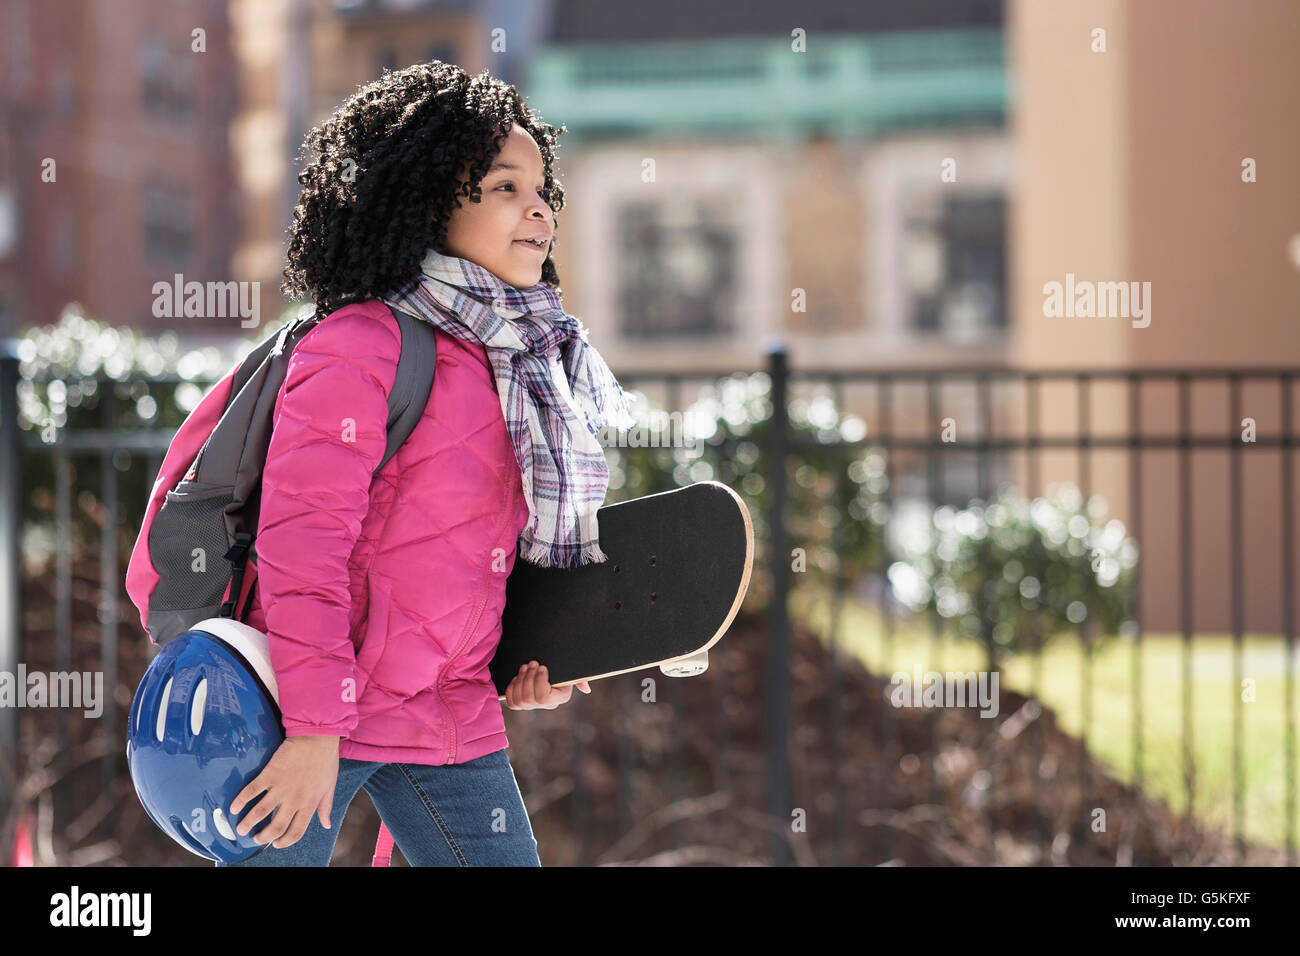 African American girl carrying skateboard outdoors Stock Photo